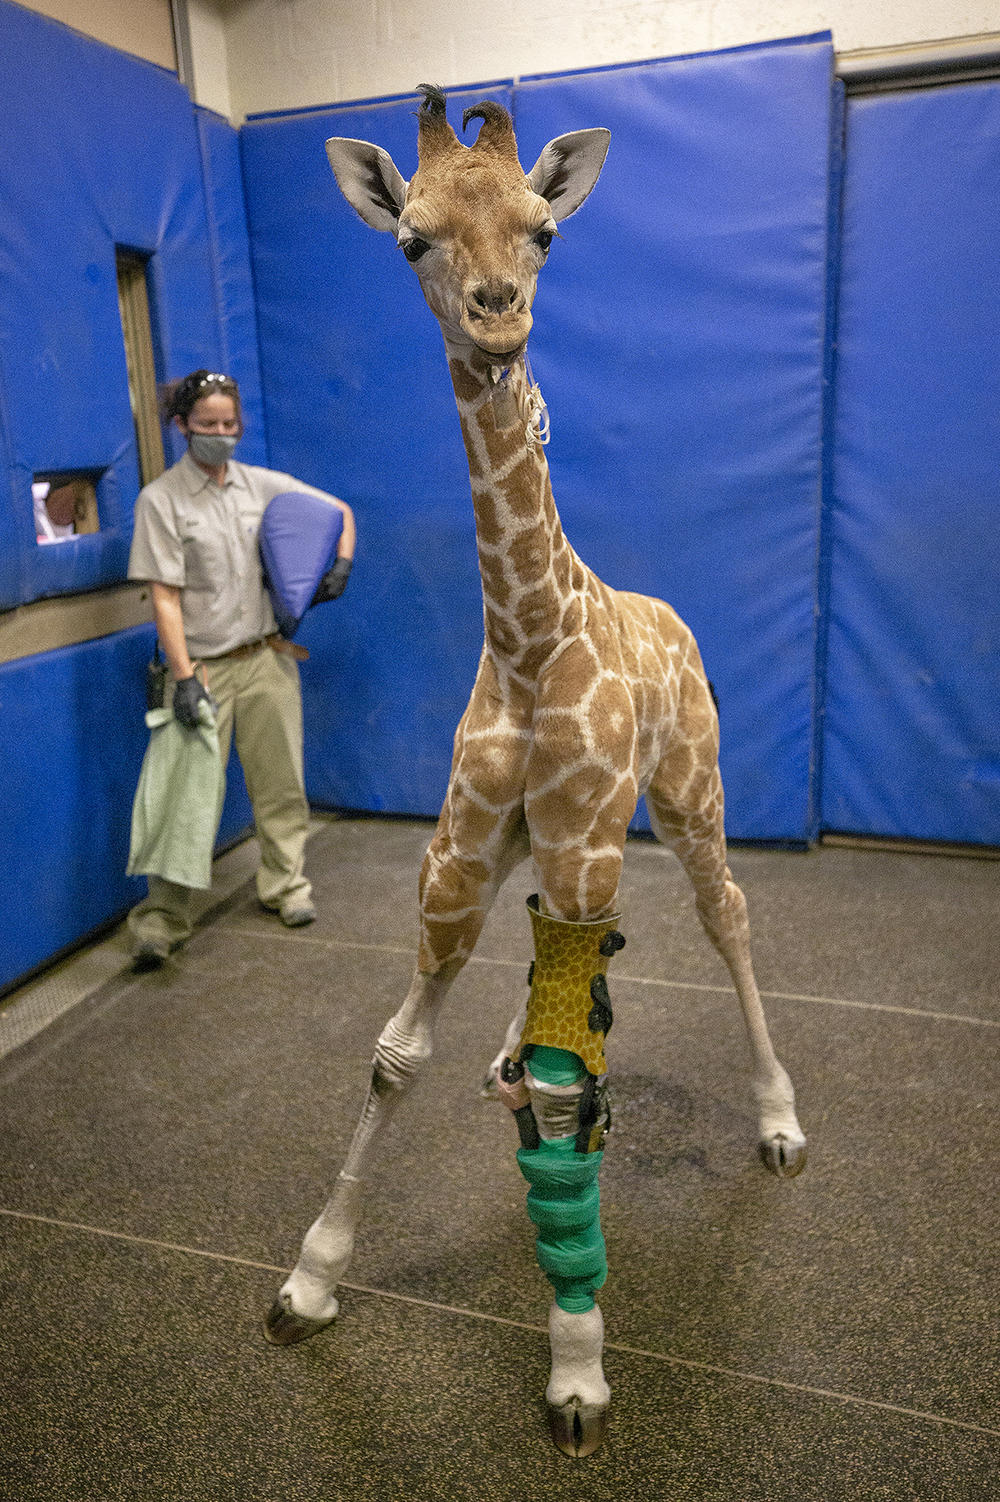 Using cast moldings of the giraffe's legs, a carbon graphite brace features the animal's distinct pattern of crooked spots to match her fur. In the end, Msituni only needed one brace; and the other leg corrected itself with the medical grade brace.